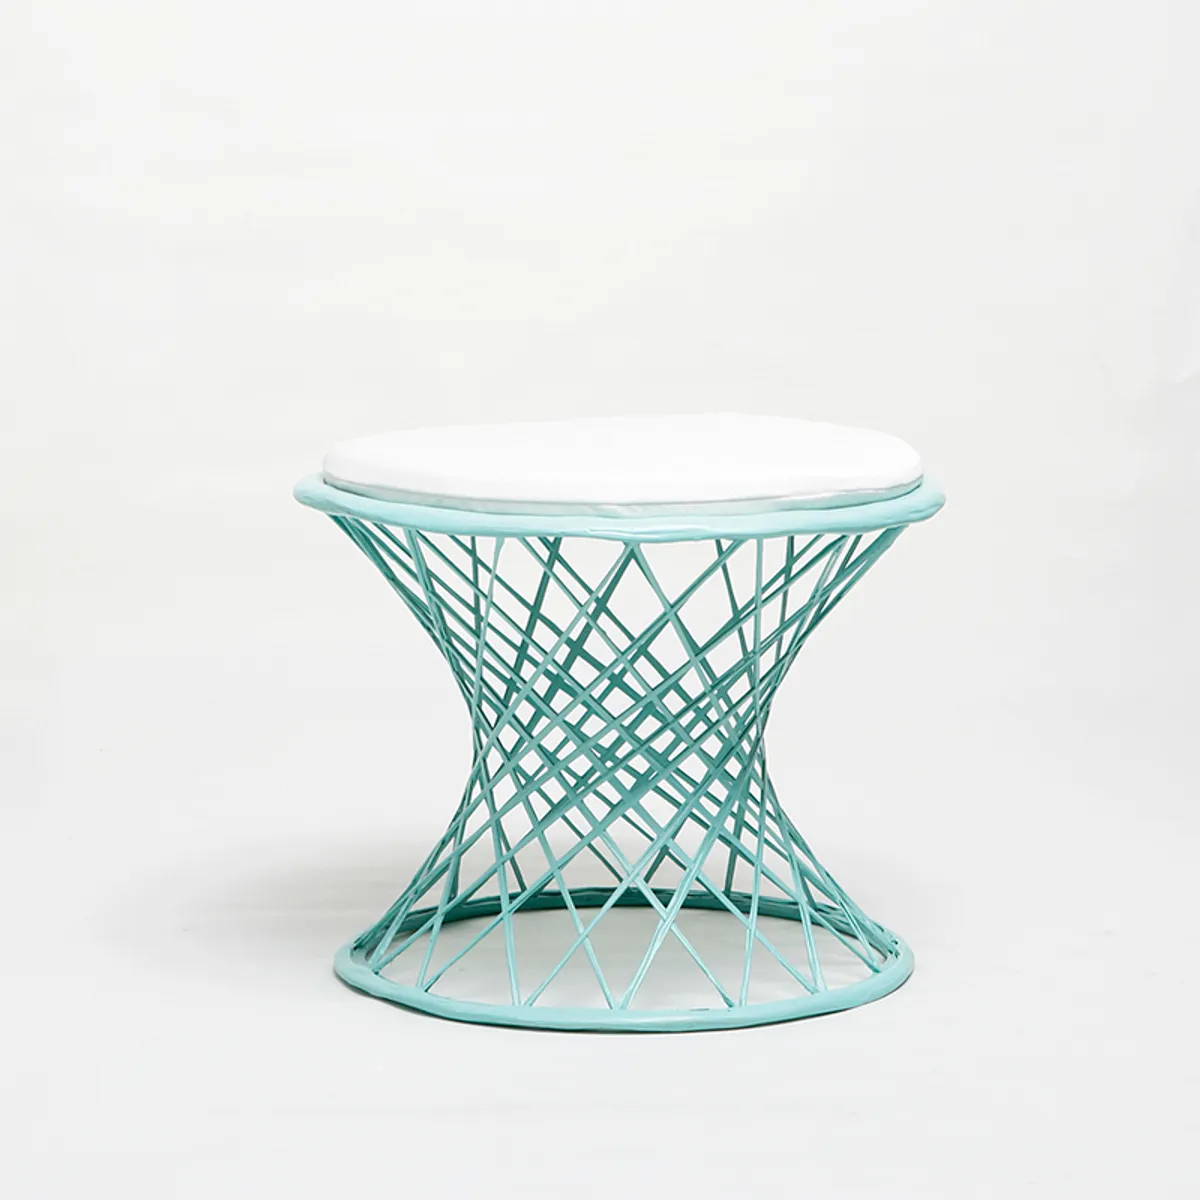 Cacti Stool Outdoor Furniture For Hotels Spas And Healthcare By Insideoutcontracts